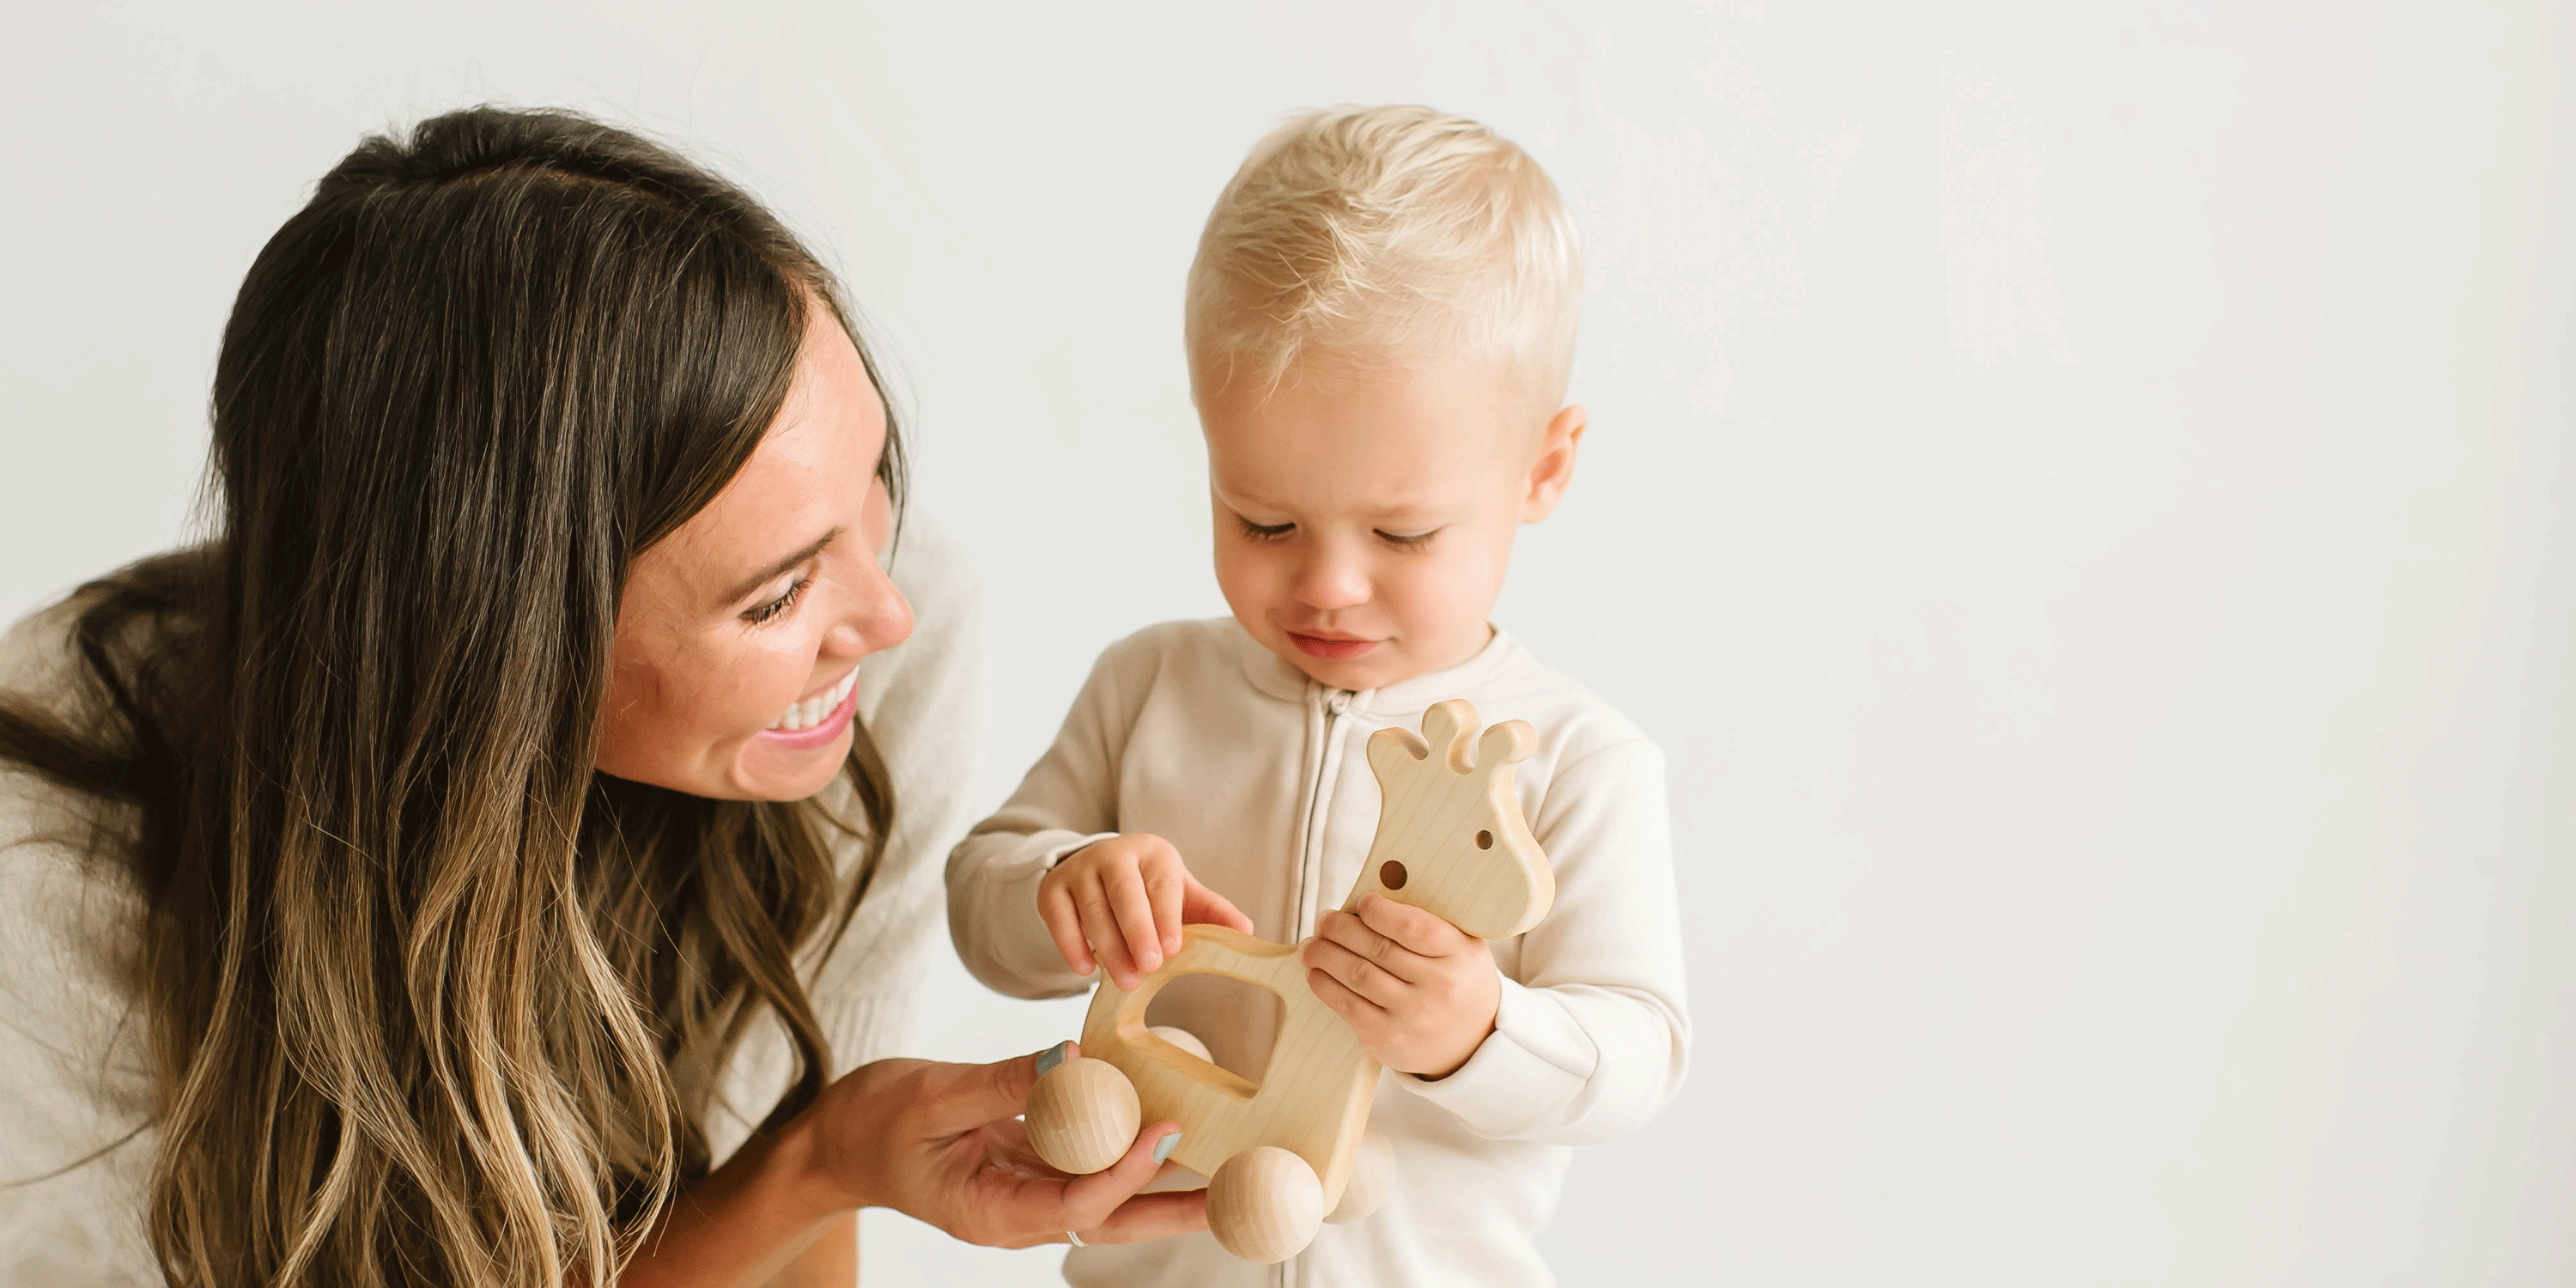 Understanding your baby's cues and communication